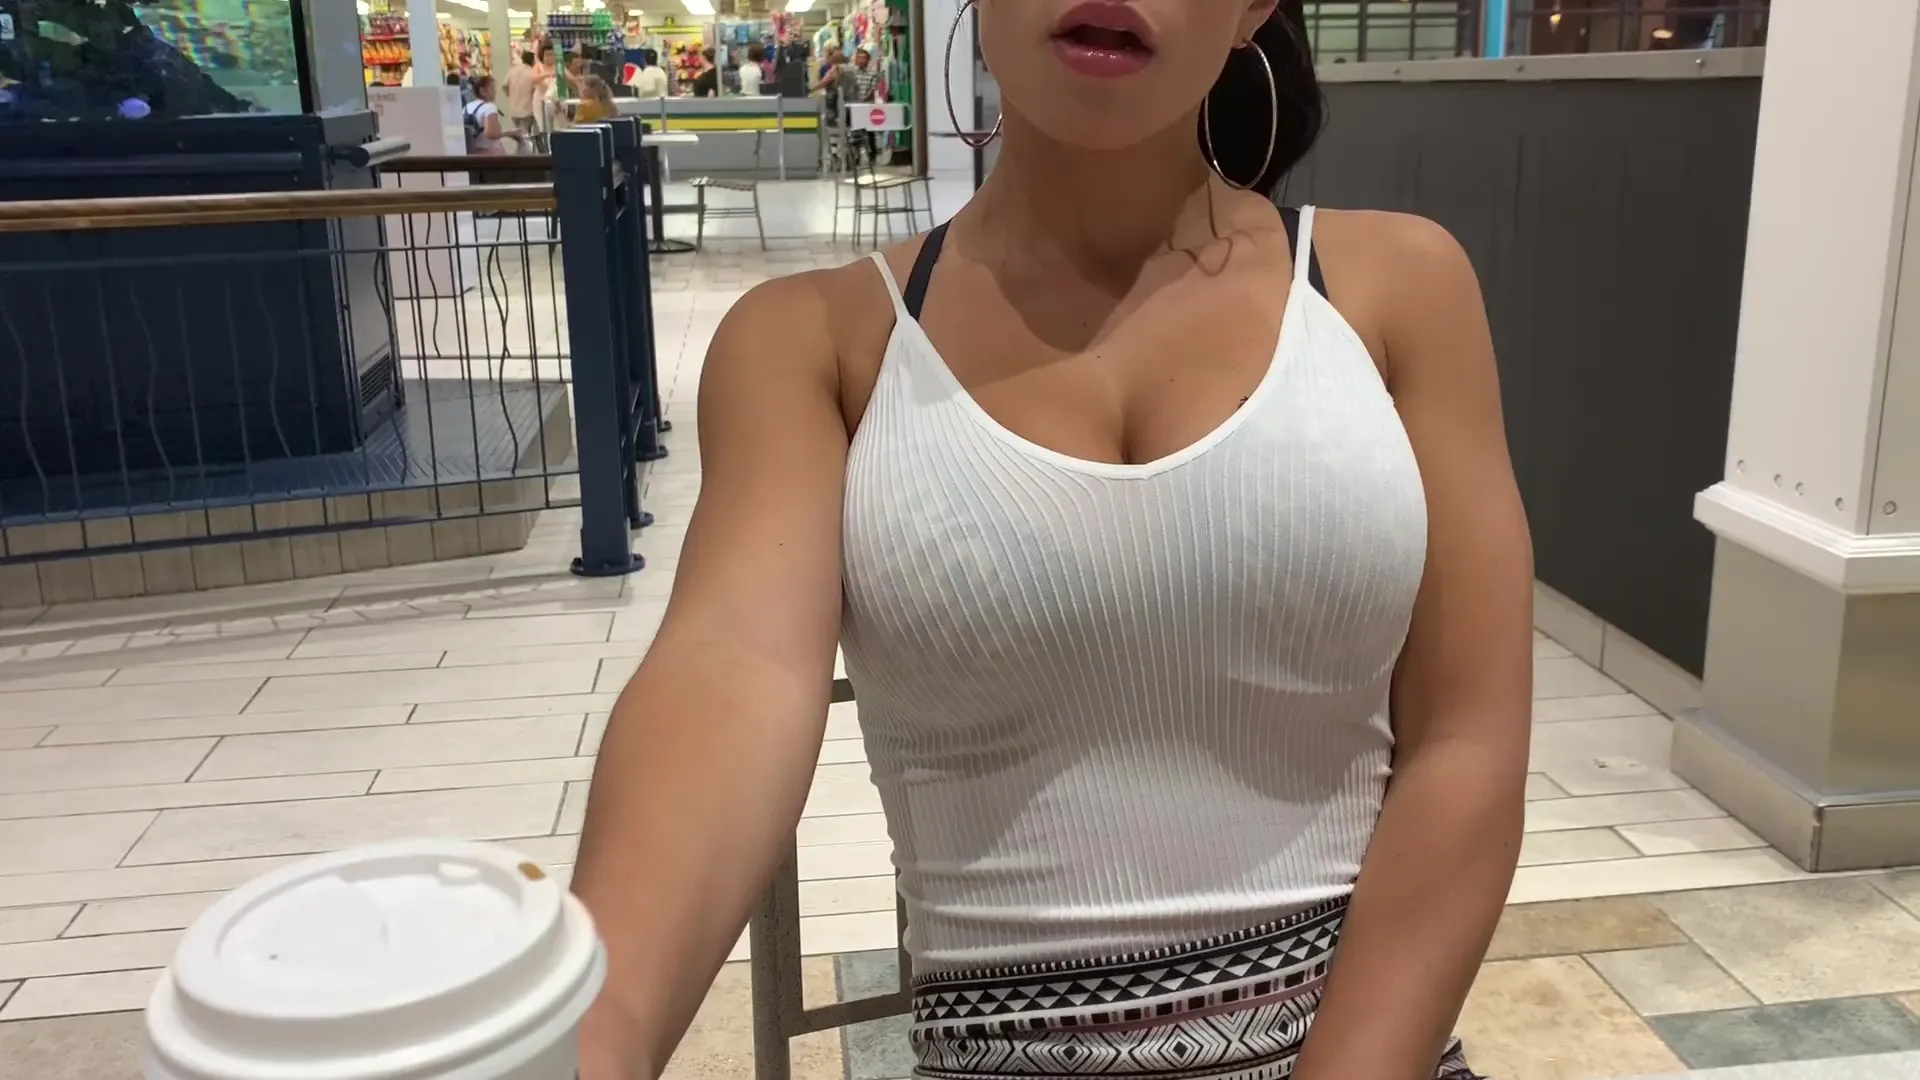 Orgasms Control in Public (Lovense Lush on Remote) picture pic